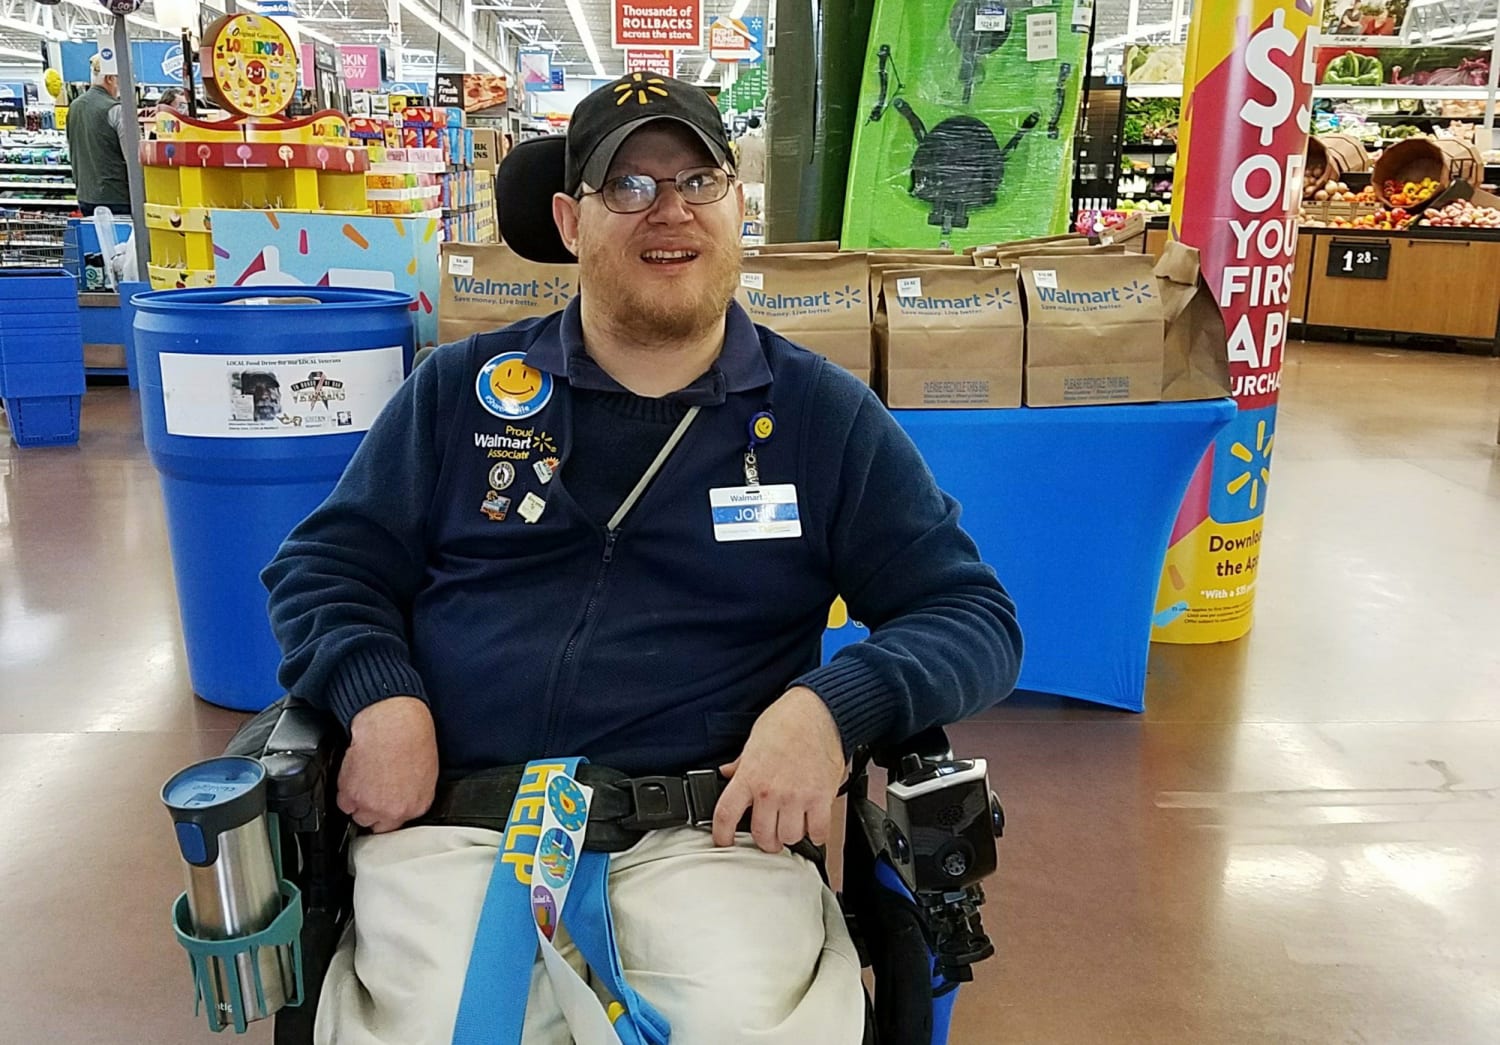 Walmart Is Eliminating People Greeters. Workers With Disabilities